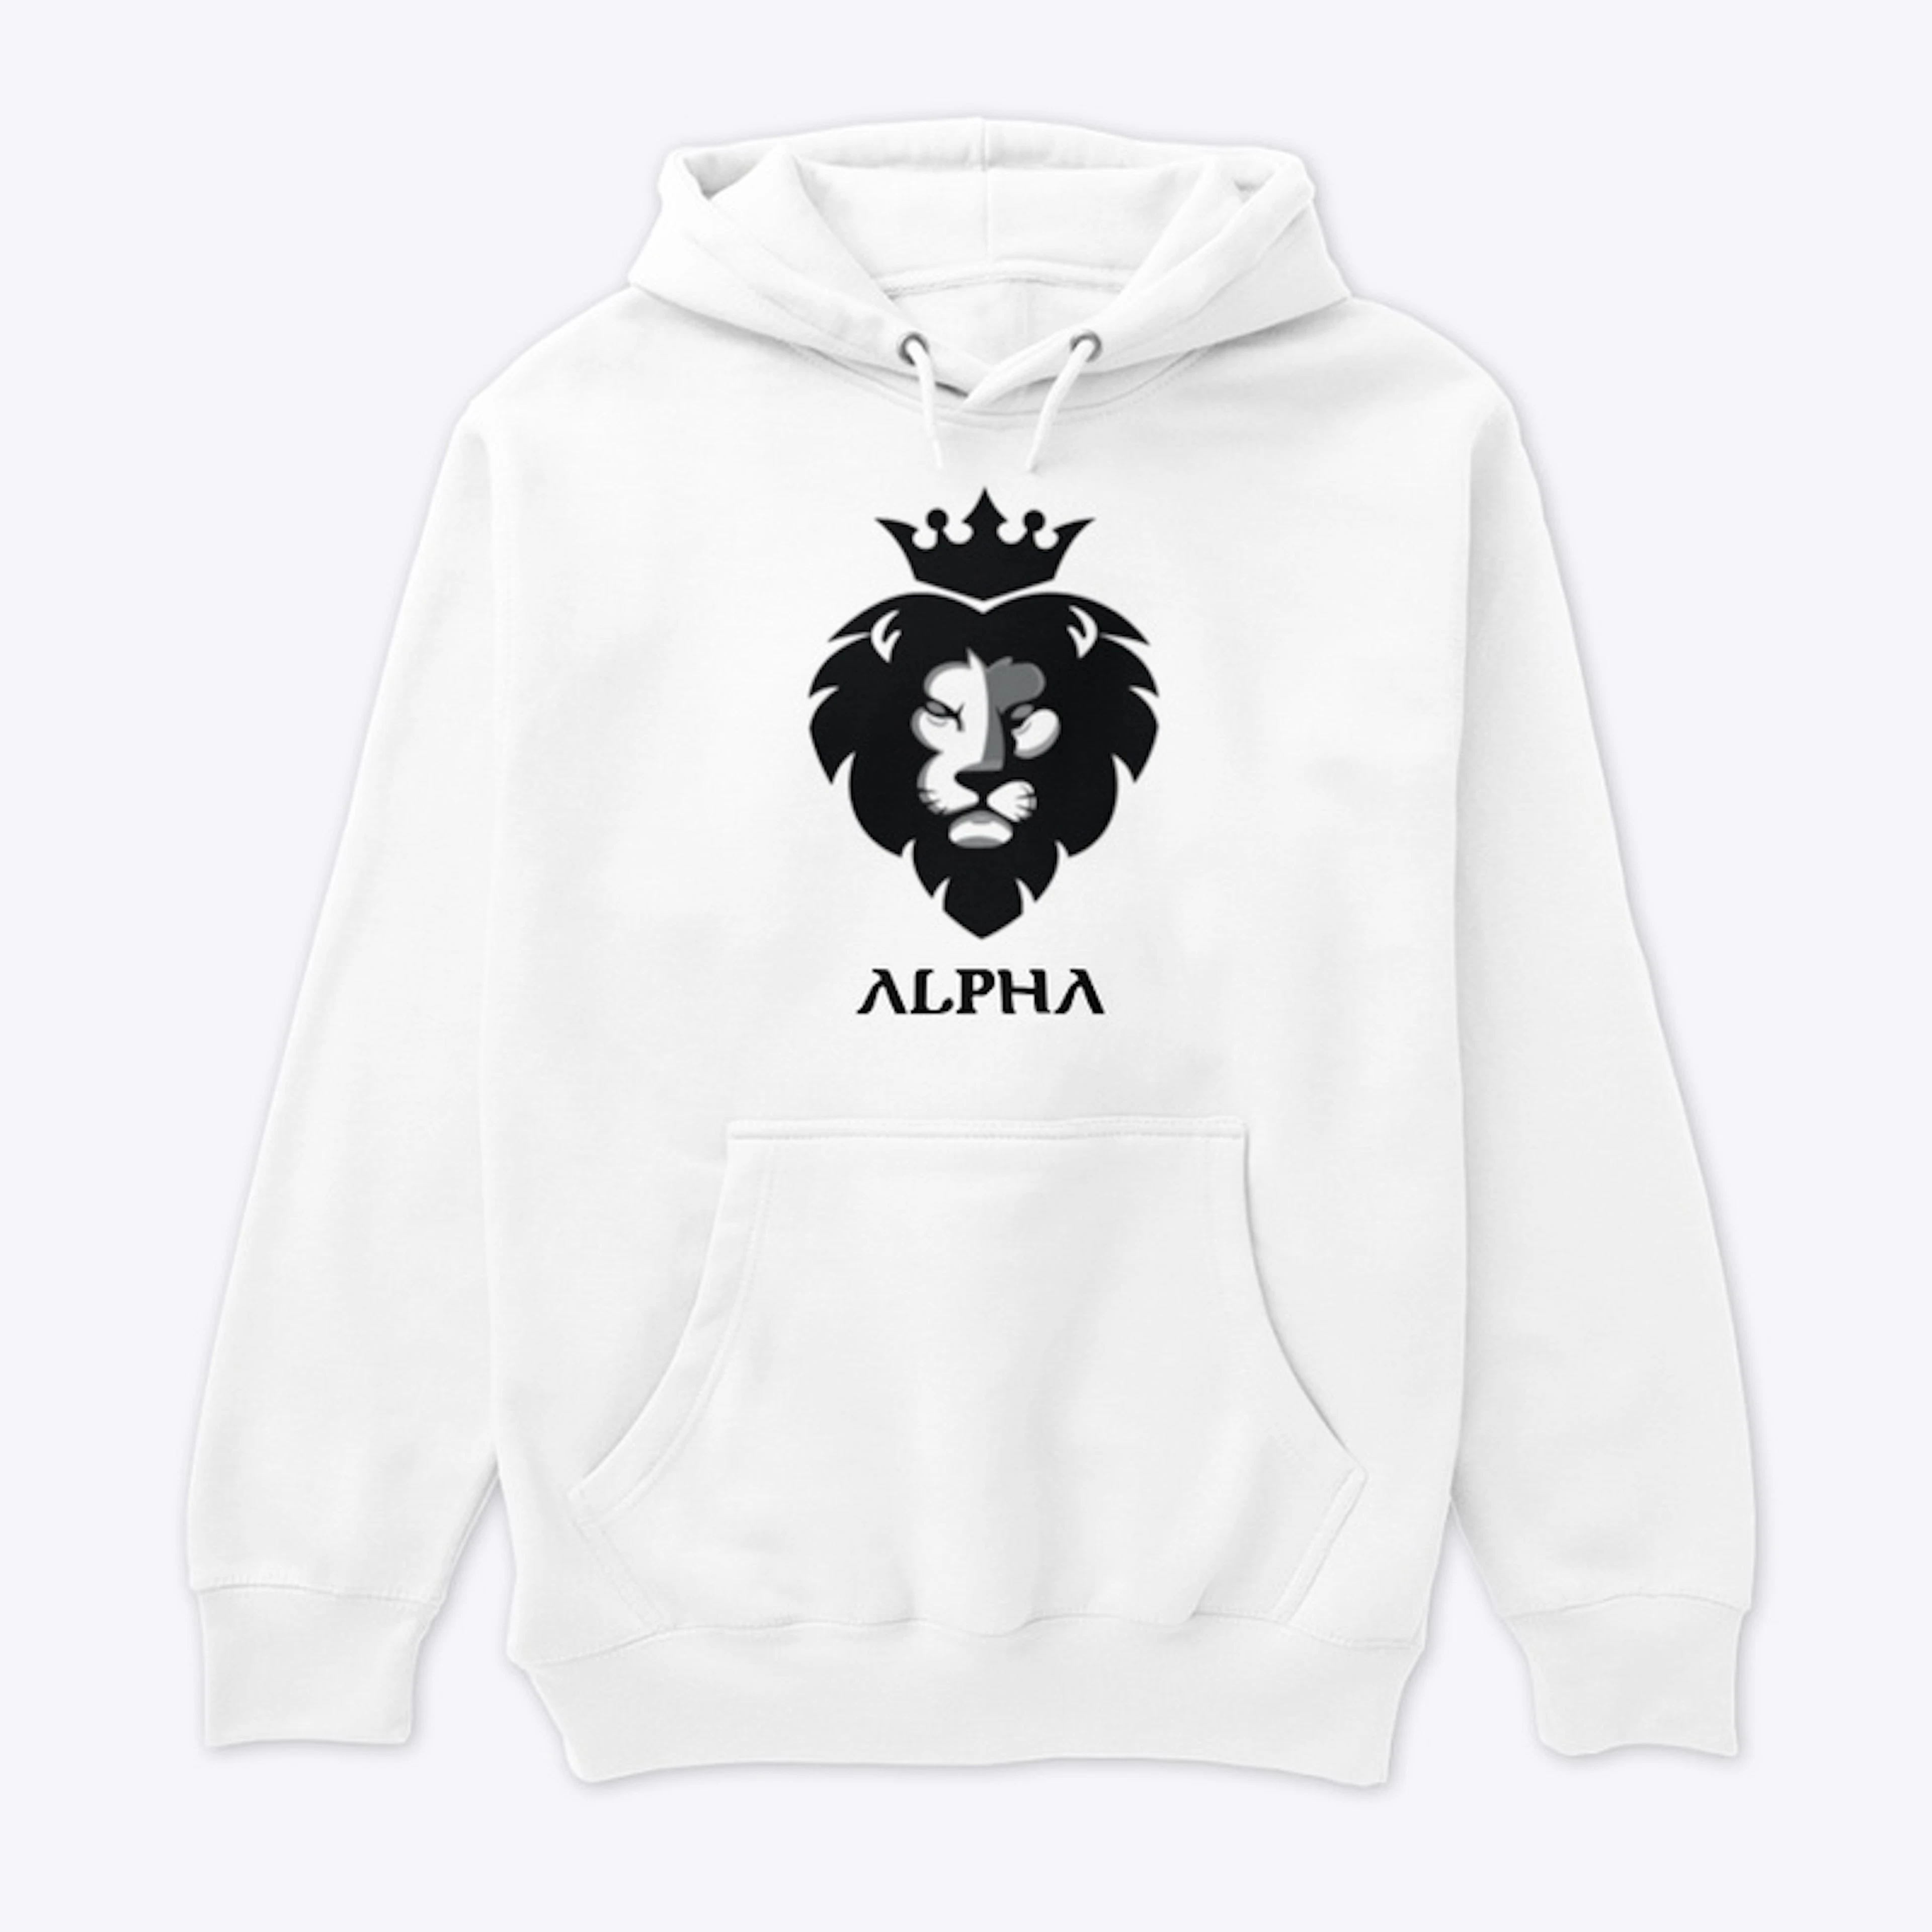 The ALPHA Collection